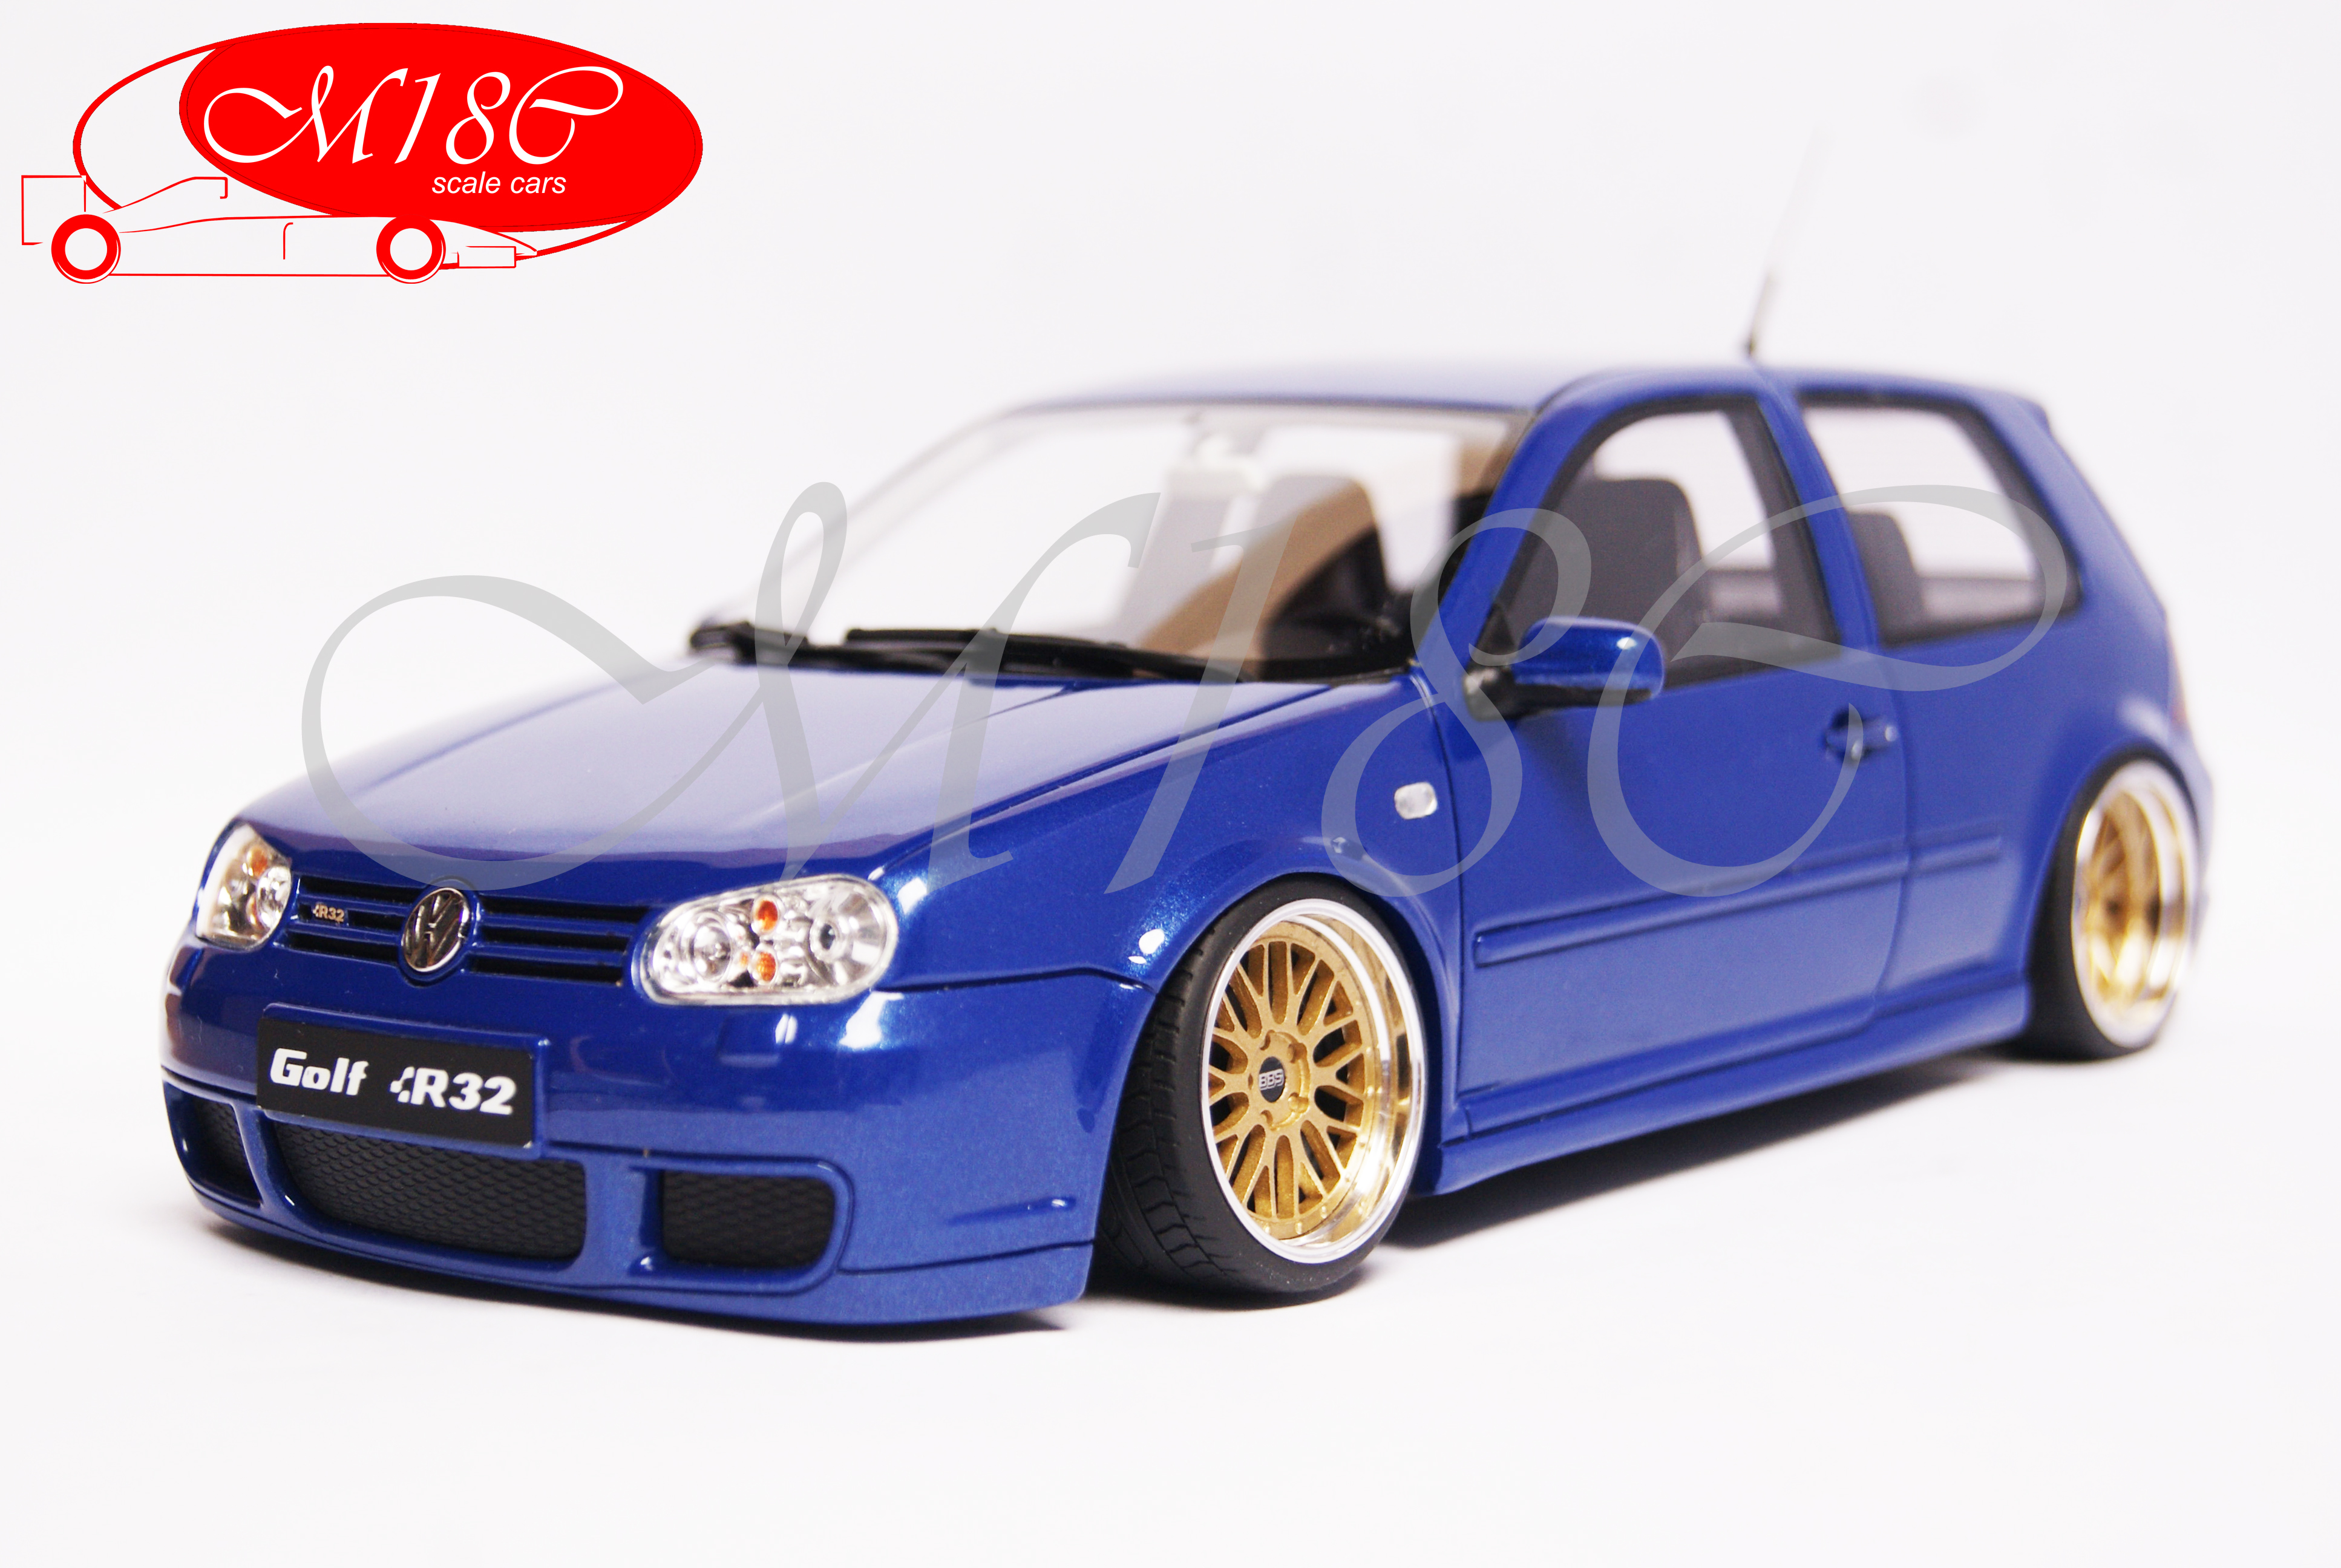 Volkswagen Golf IV R32 1/18 Ottomobile IV R32 bleu jantes BBS 19 pouces bords larges tuning diecast model cars